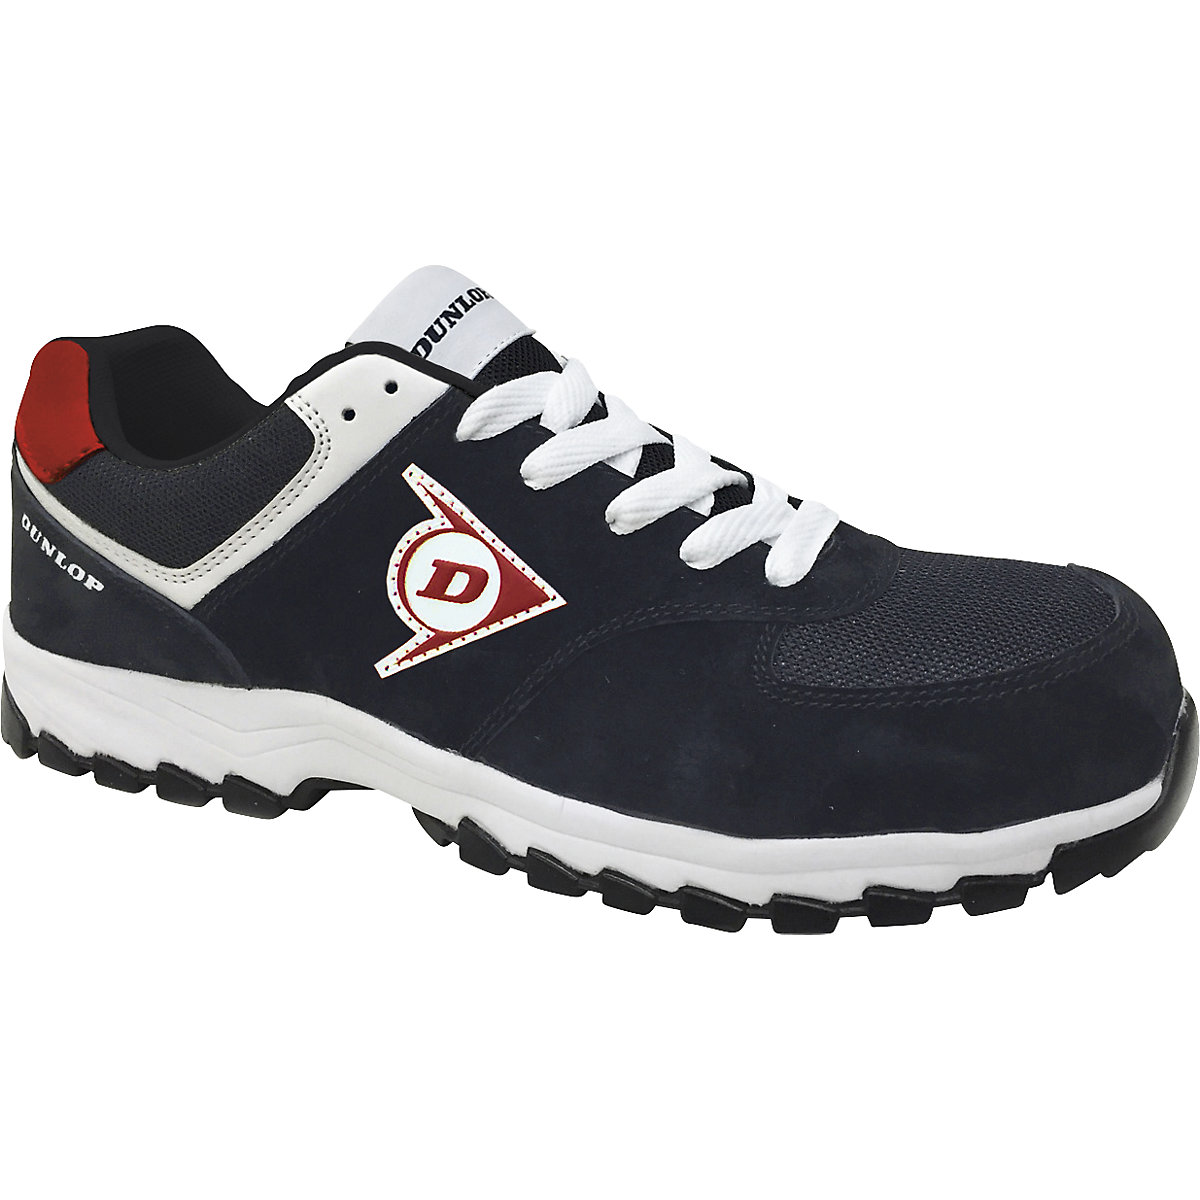 FLYING ARROW S3 safety lace-up shoes - DUNLOP